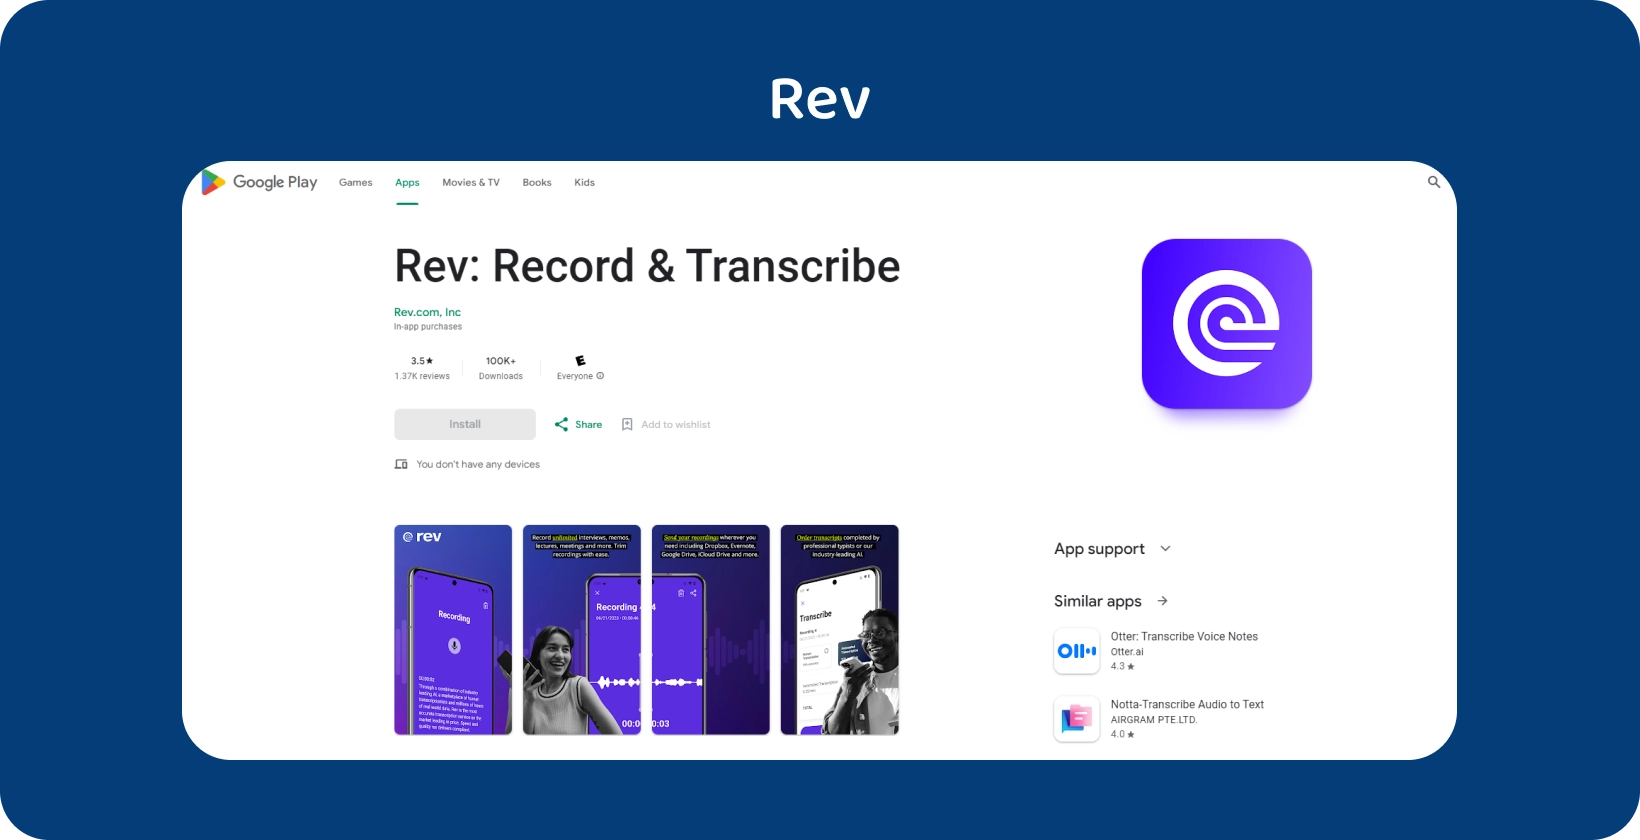 Google Play Store display of Rev app, highlighting features for recording and transcription on Android devices.